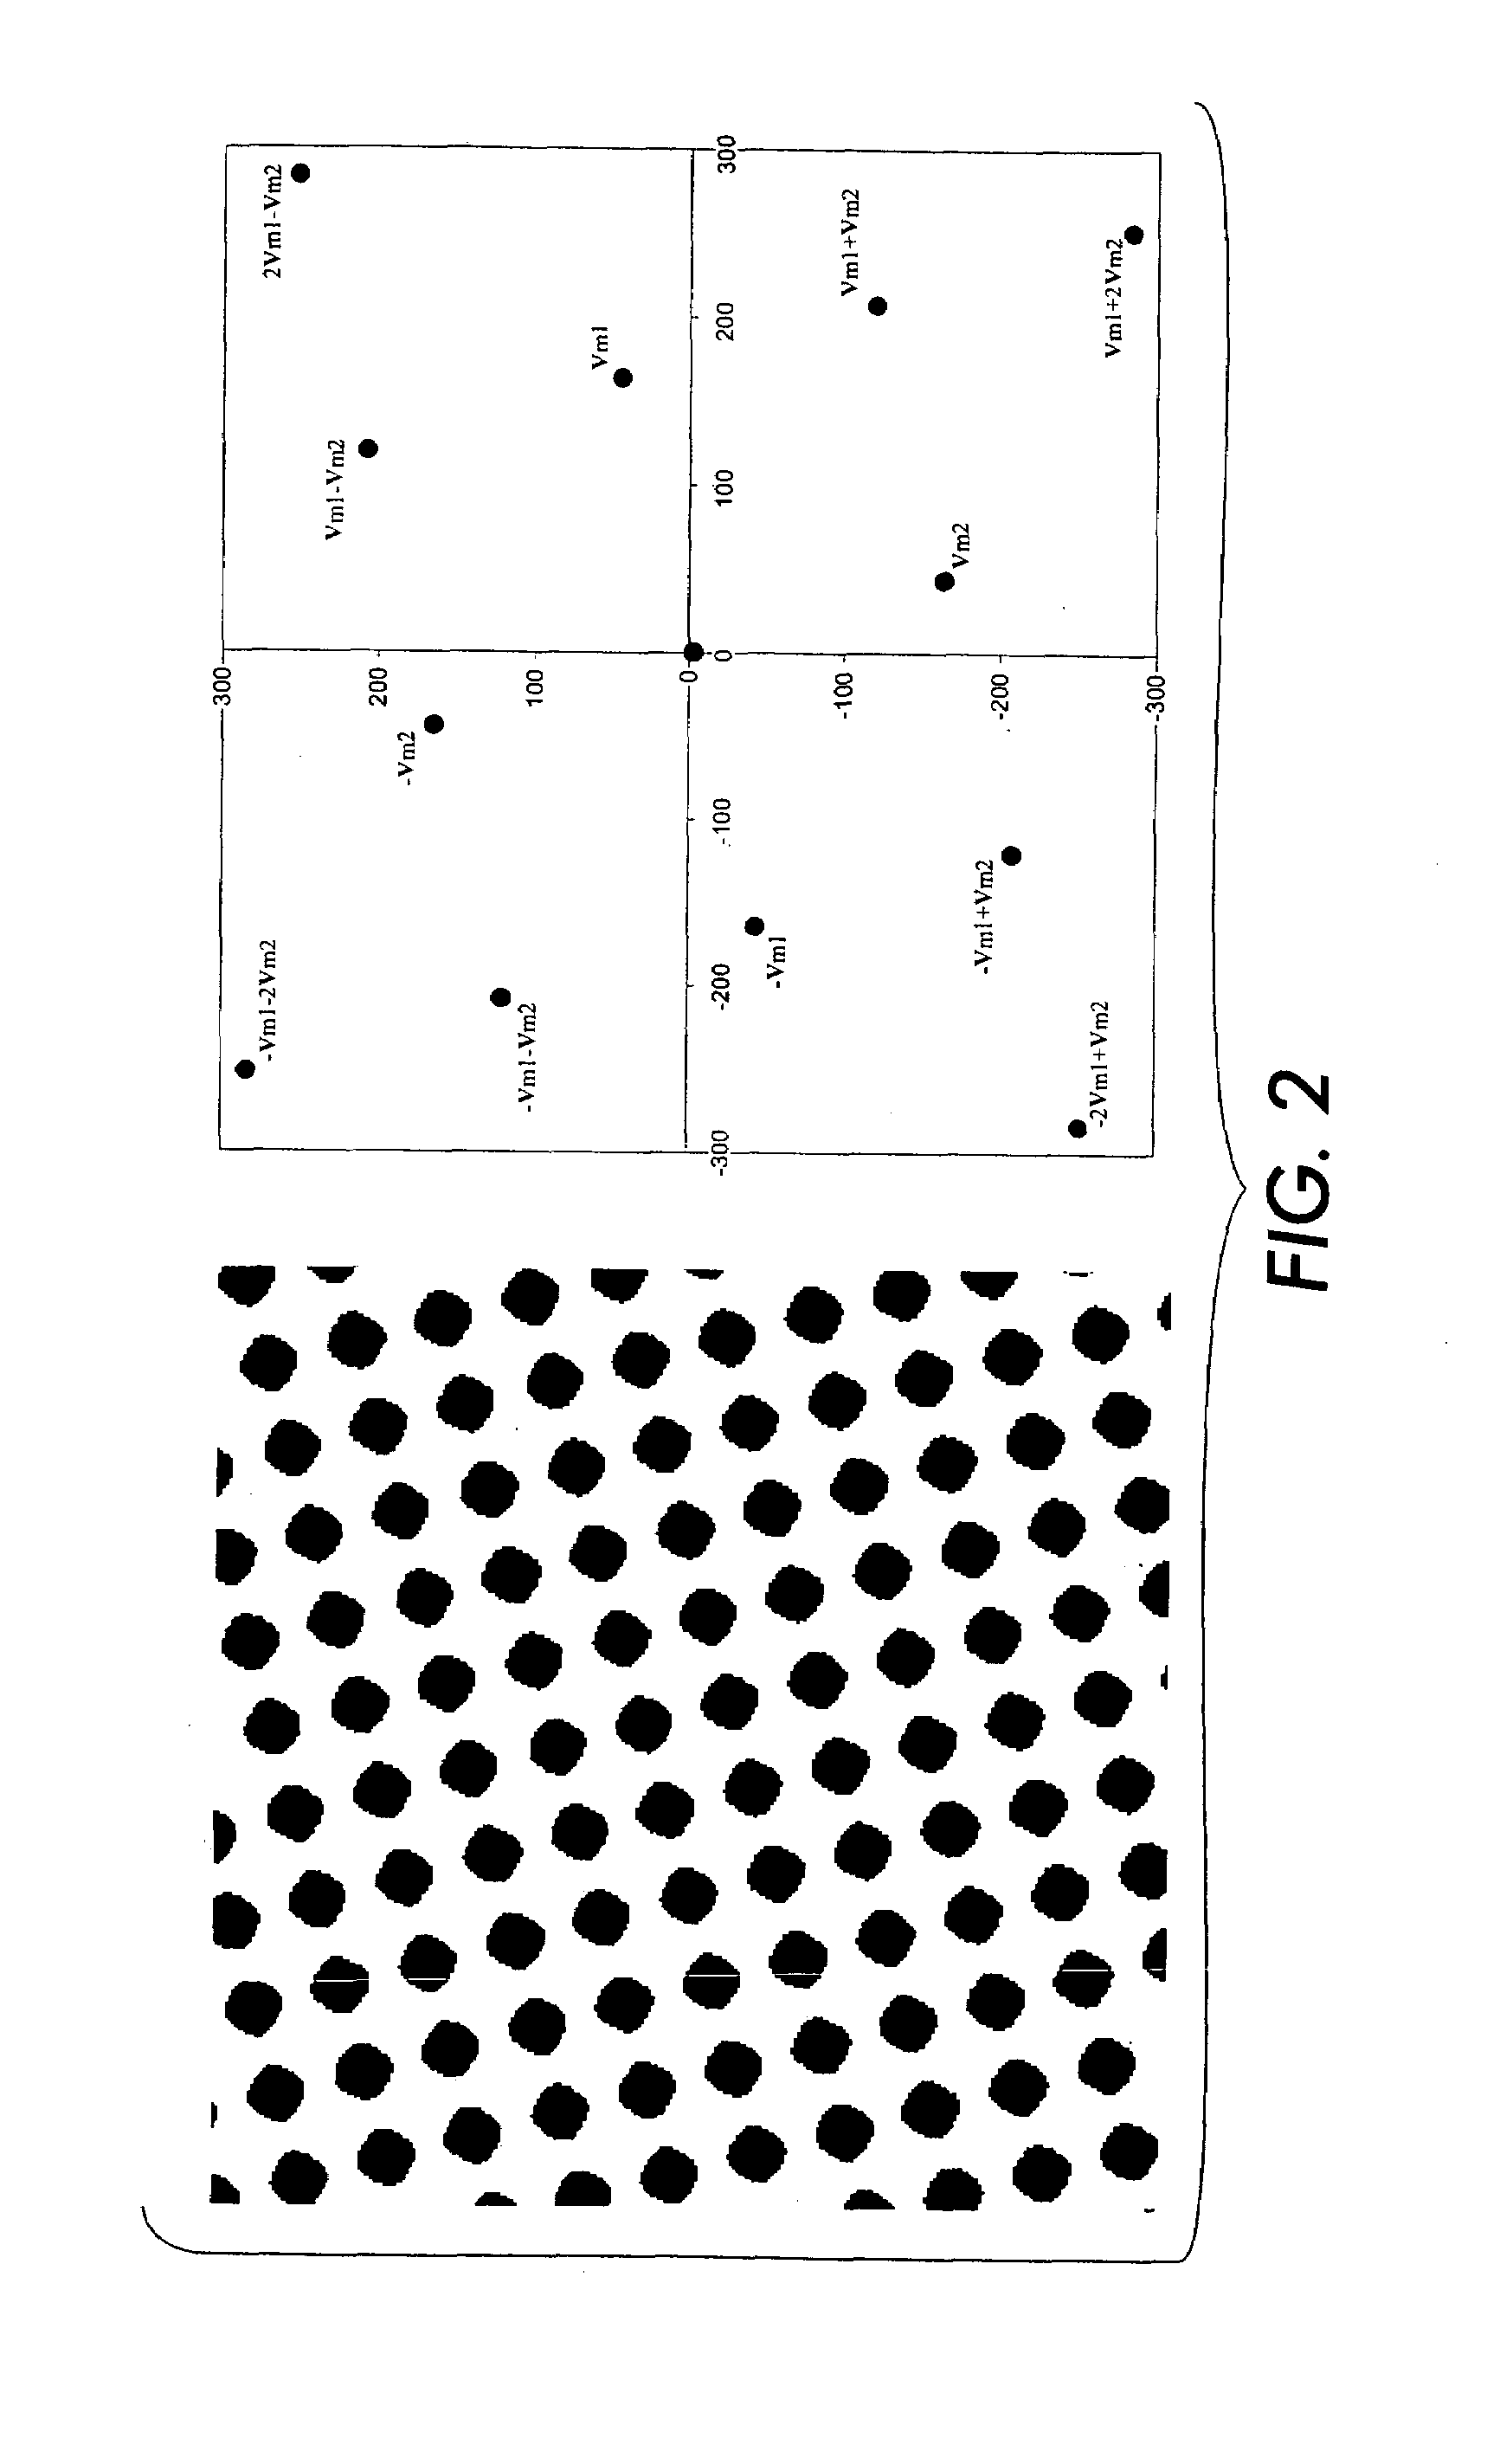 Moire-free color halftone configuration employing common frequency vectors